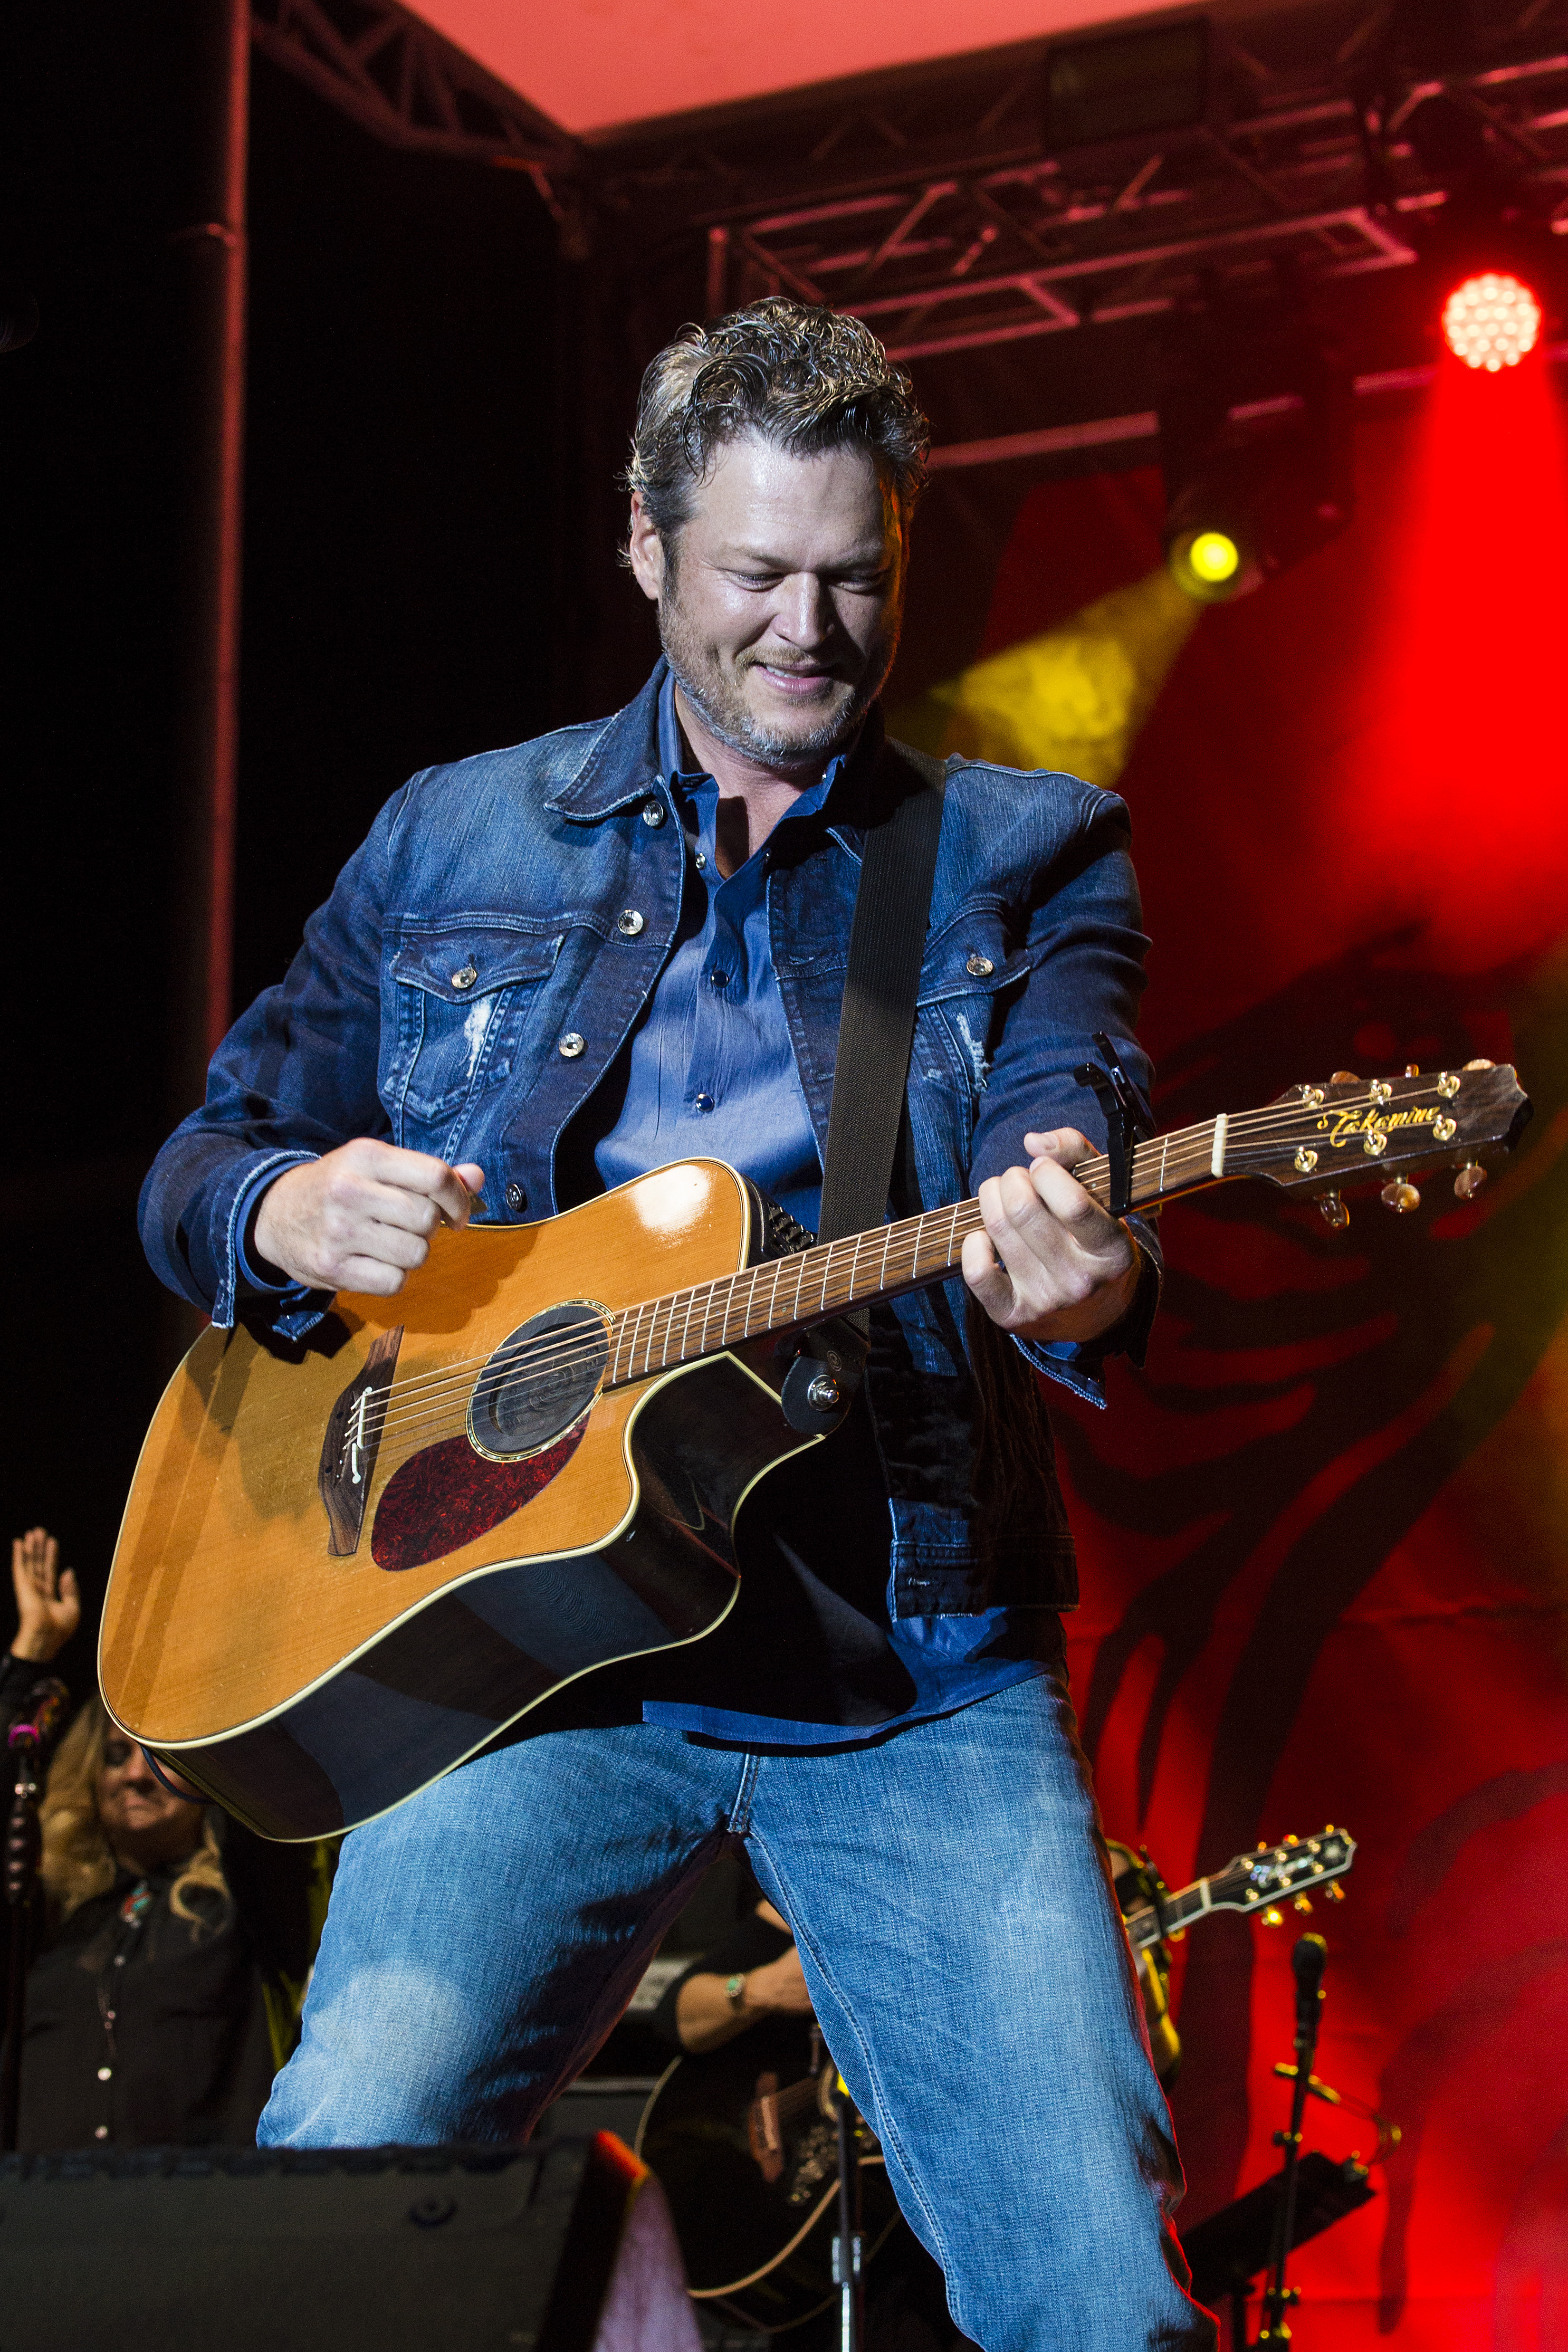 Blake has invested time into his own pursuits recently, including his tour